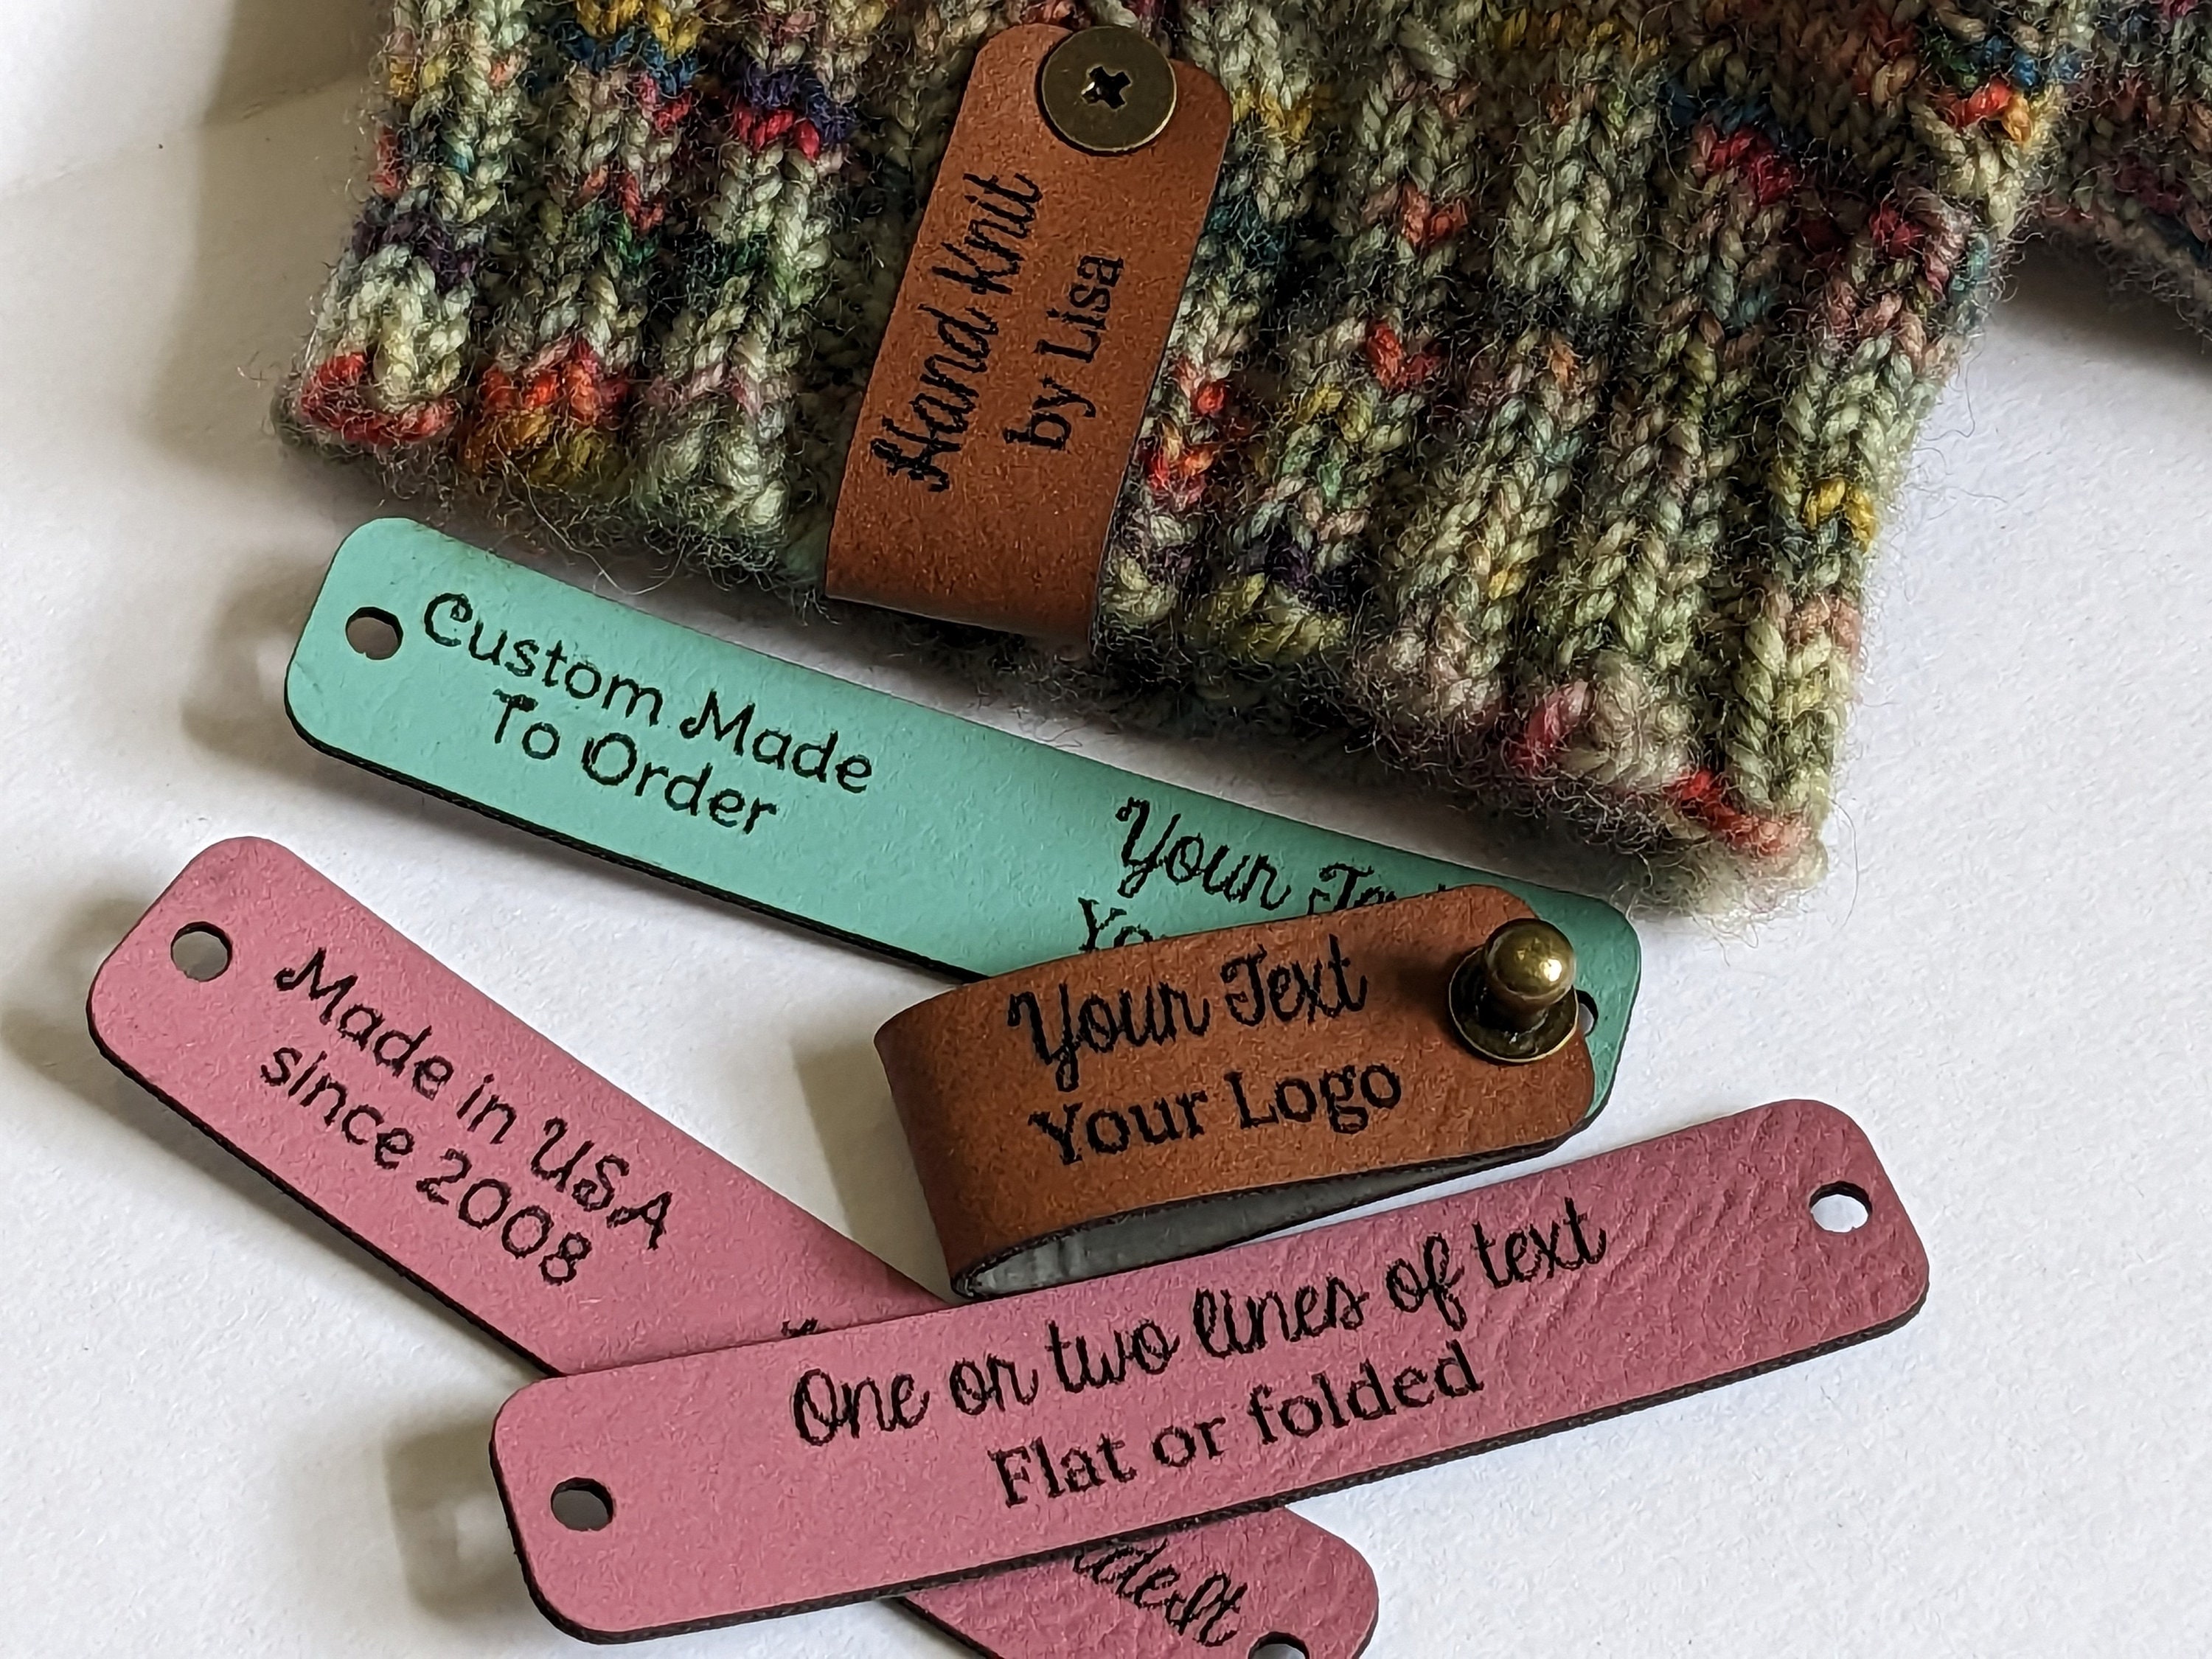 Handmade with love' tags for knits and crochet with rivets - 2.5x0